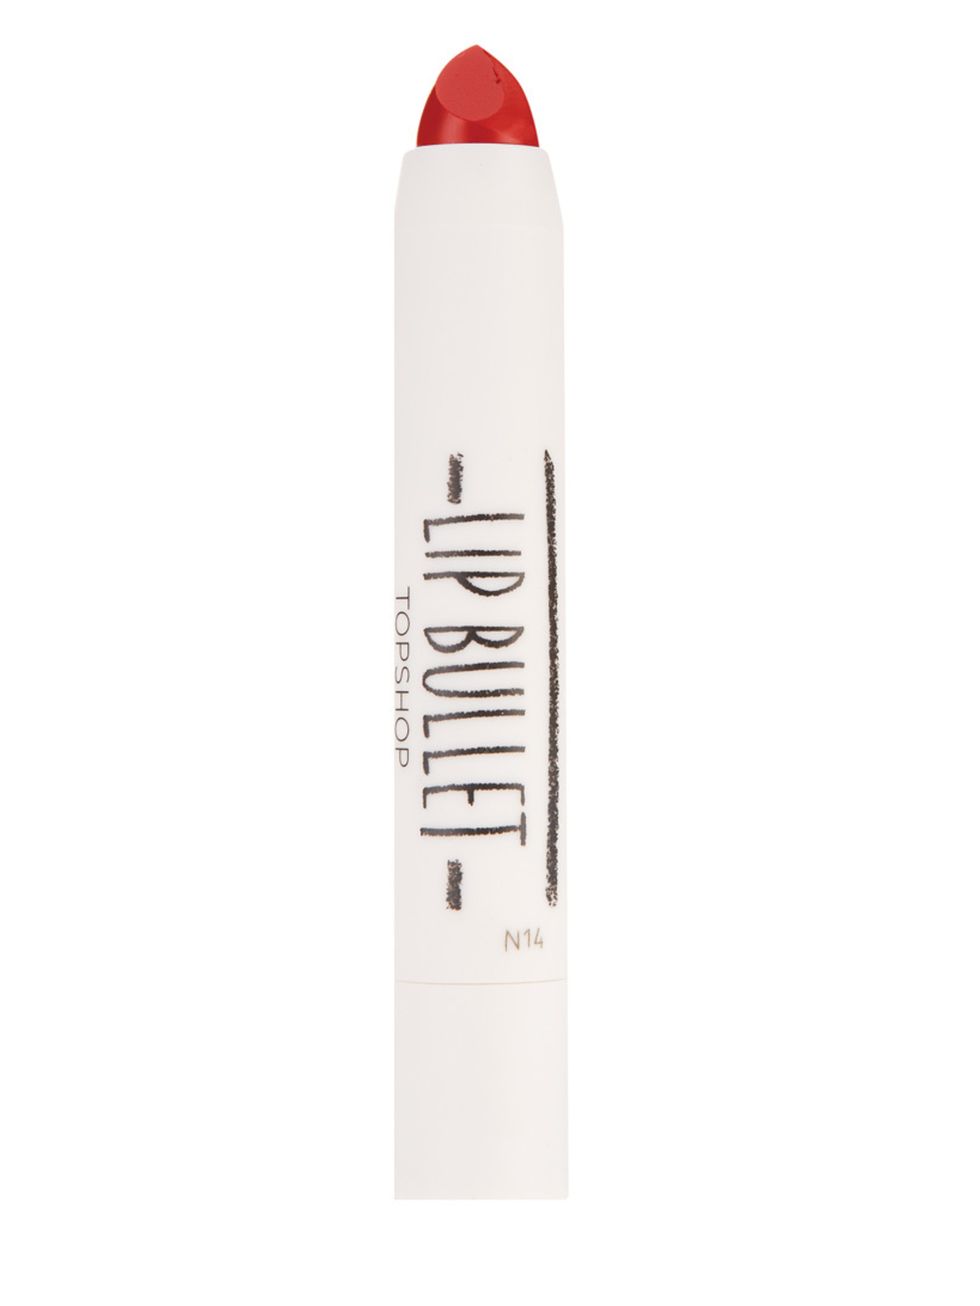 <p><strong><a href="http://www.topshop.com/en/tsuk/category/make-up-431/lips-471/lip-bullets-1885830?geoip=noredirect">Topshop Lip Bullet, £8.00</a></strong></p><p>Topshop is the surprising lipstick success story in recent history. Their angled bullets fe